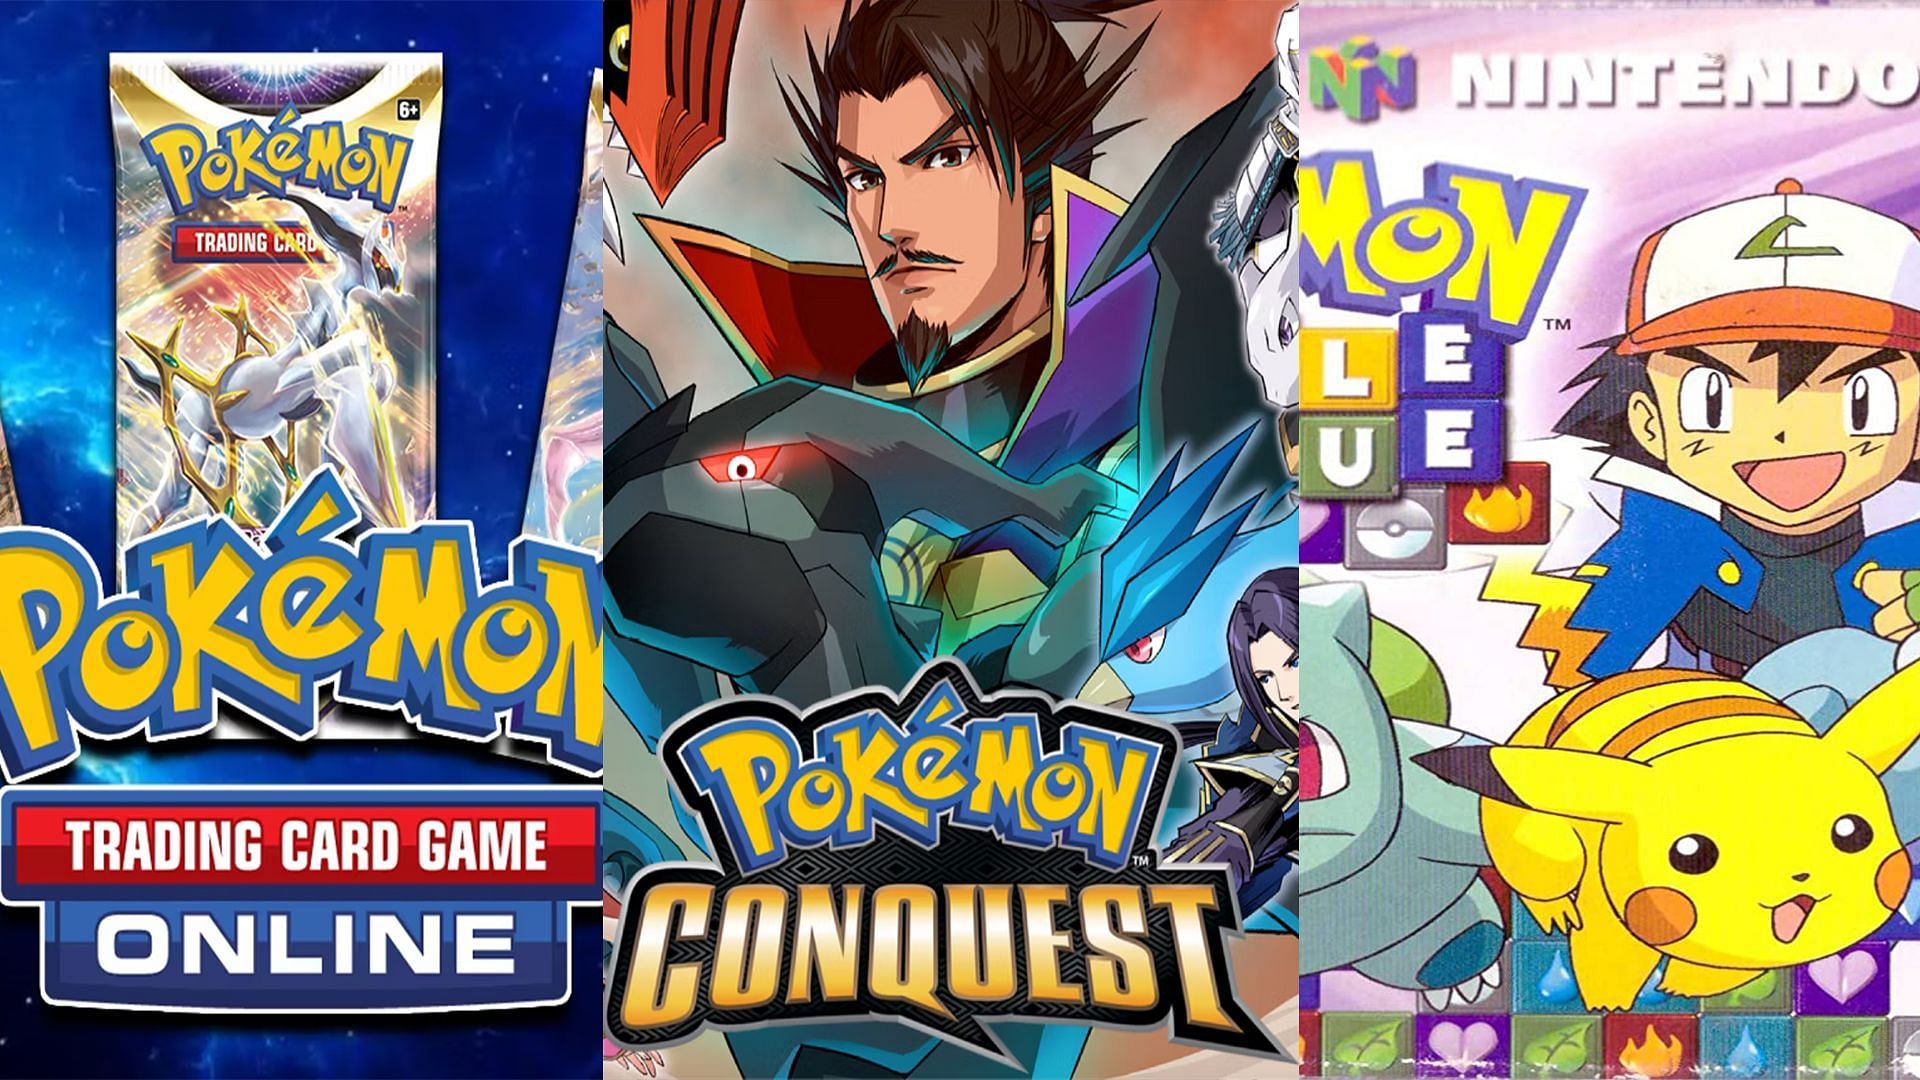 Games that are overlooked in the community (Image via Niantic)